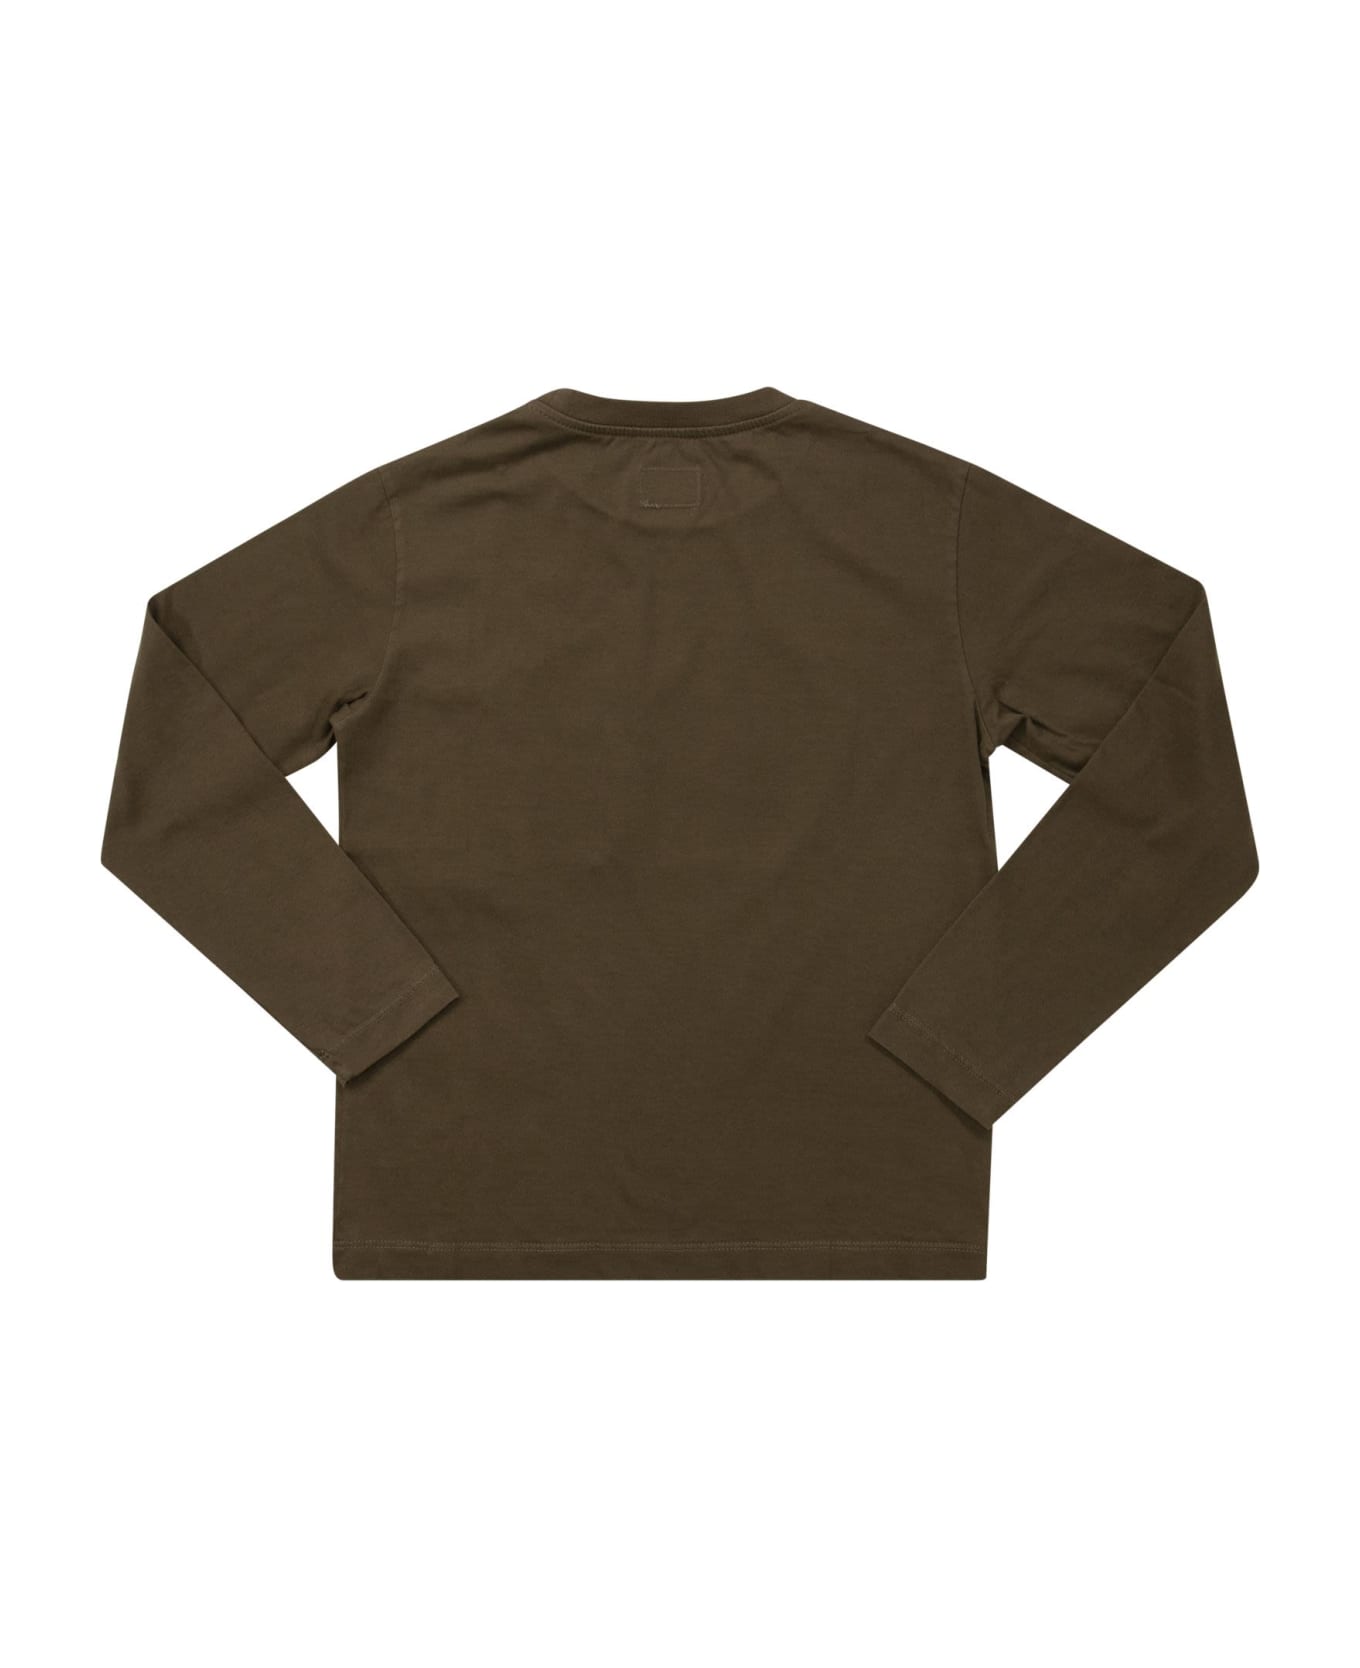 C.P. Company Logo Long Sleeved T-shirt - Forest